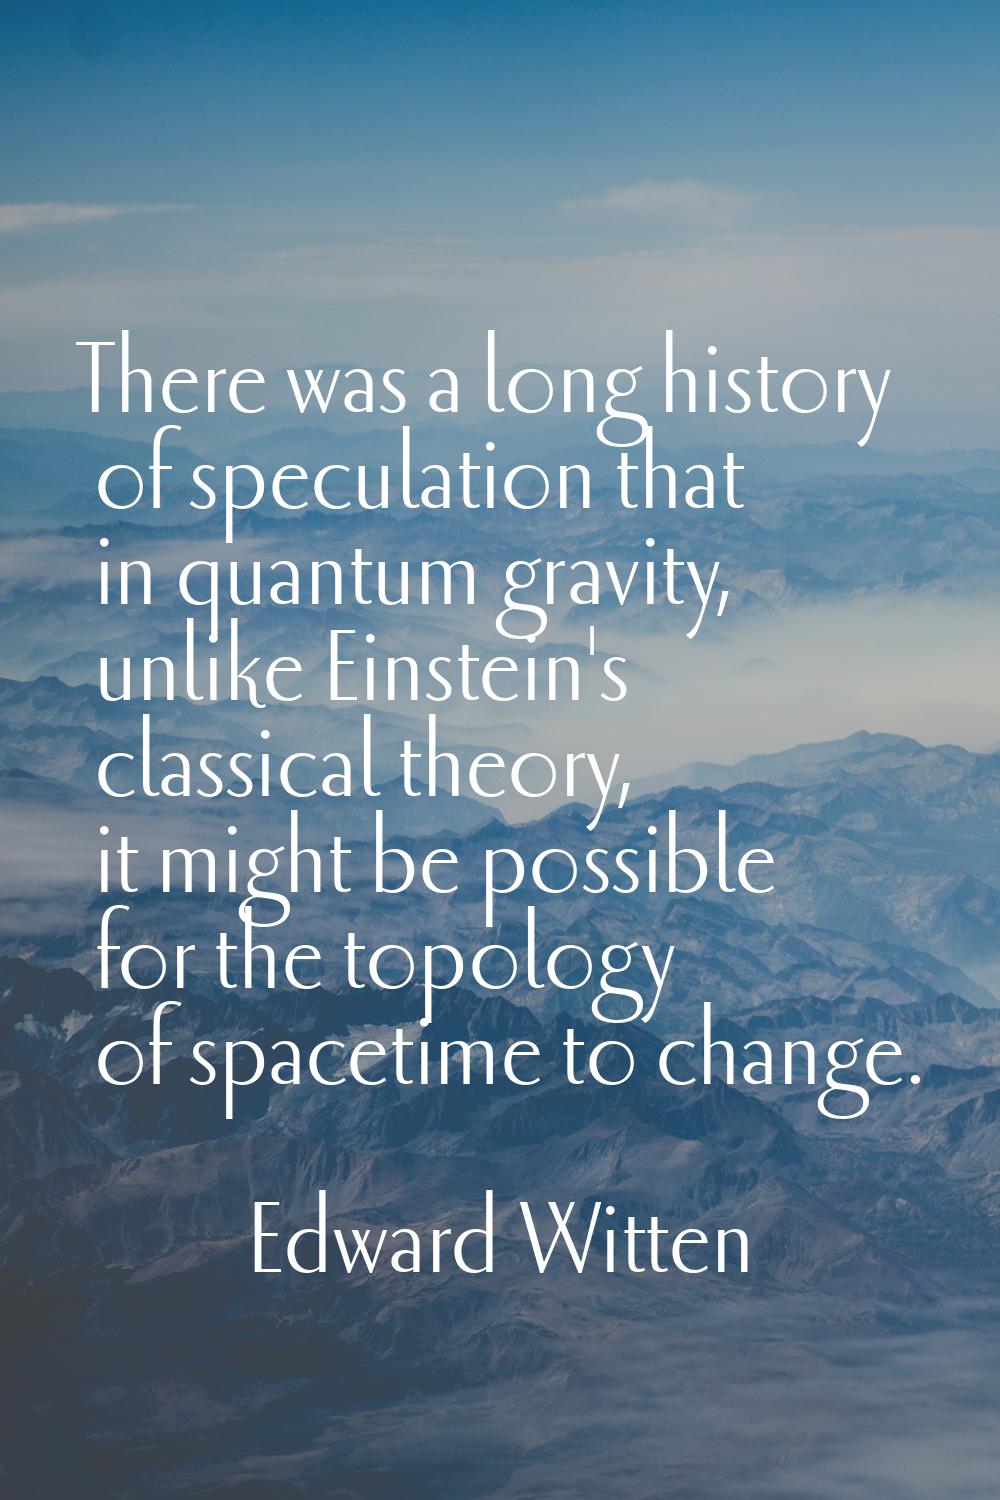 There was a long history of speculation that in quantum gravity, unlike Einstein's classical theory